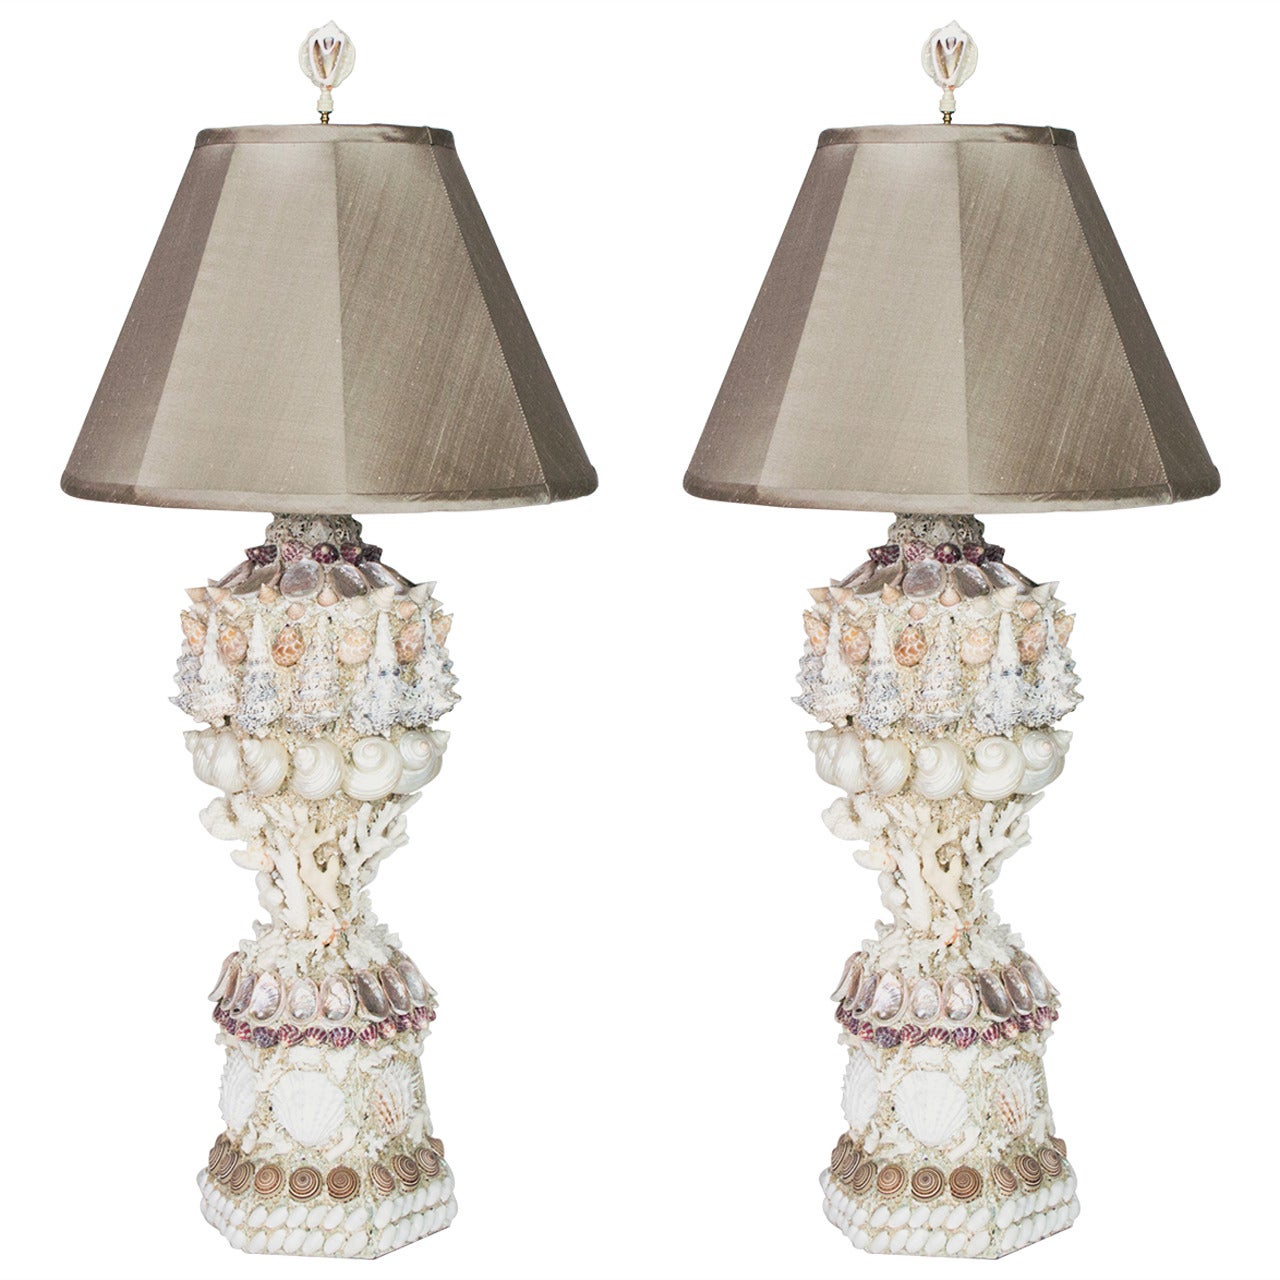 Pair of Shell Table Lamps